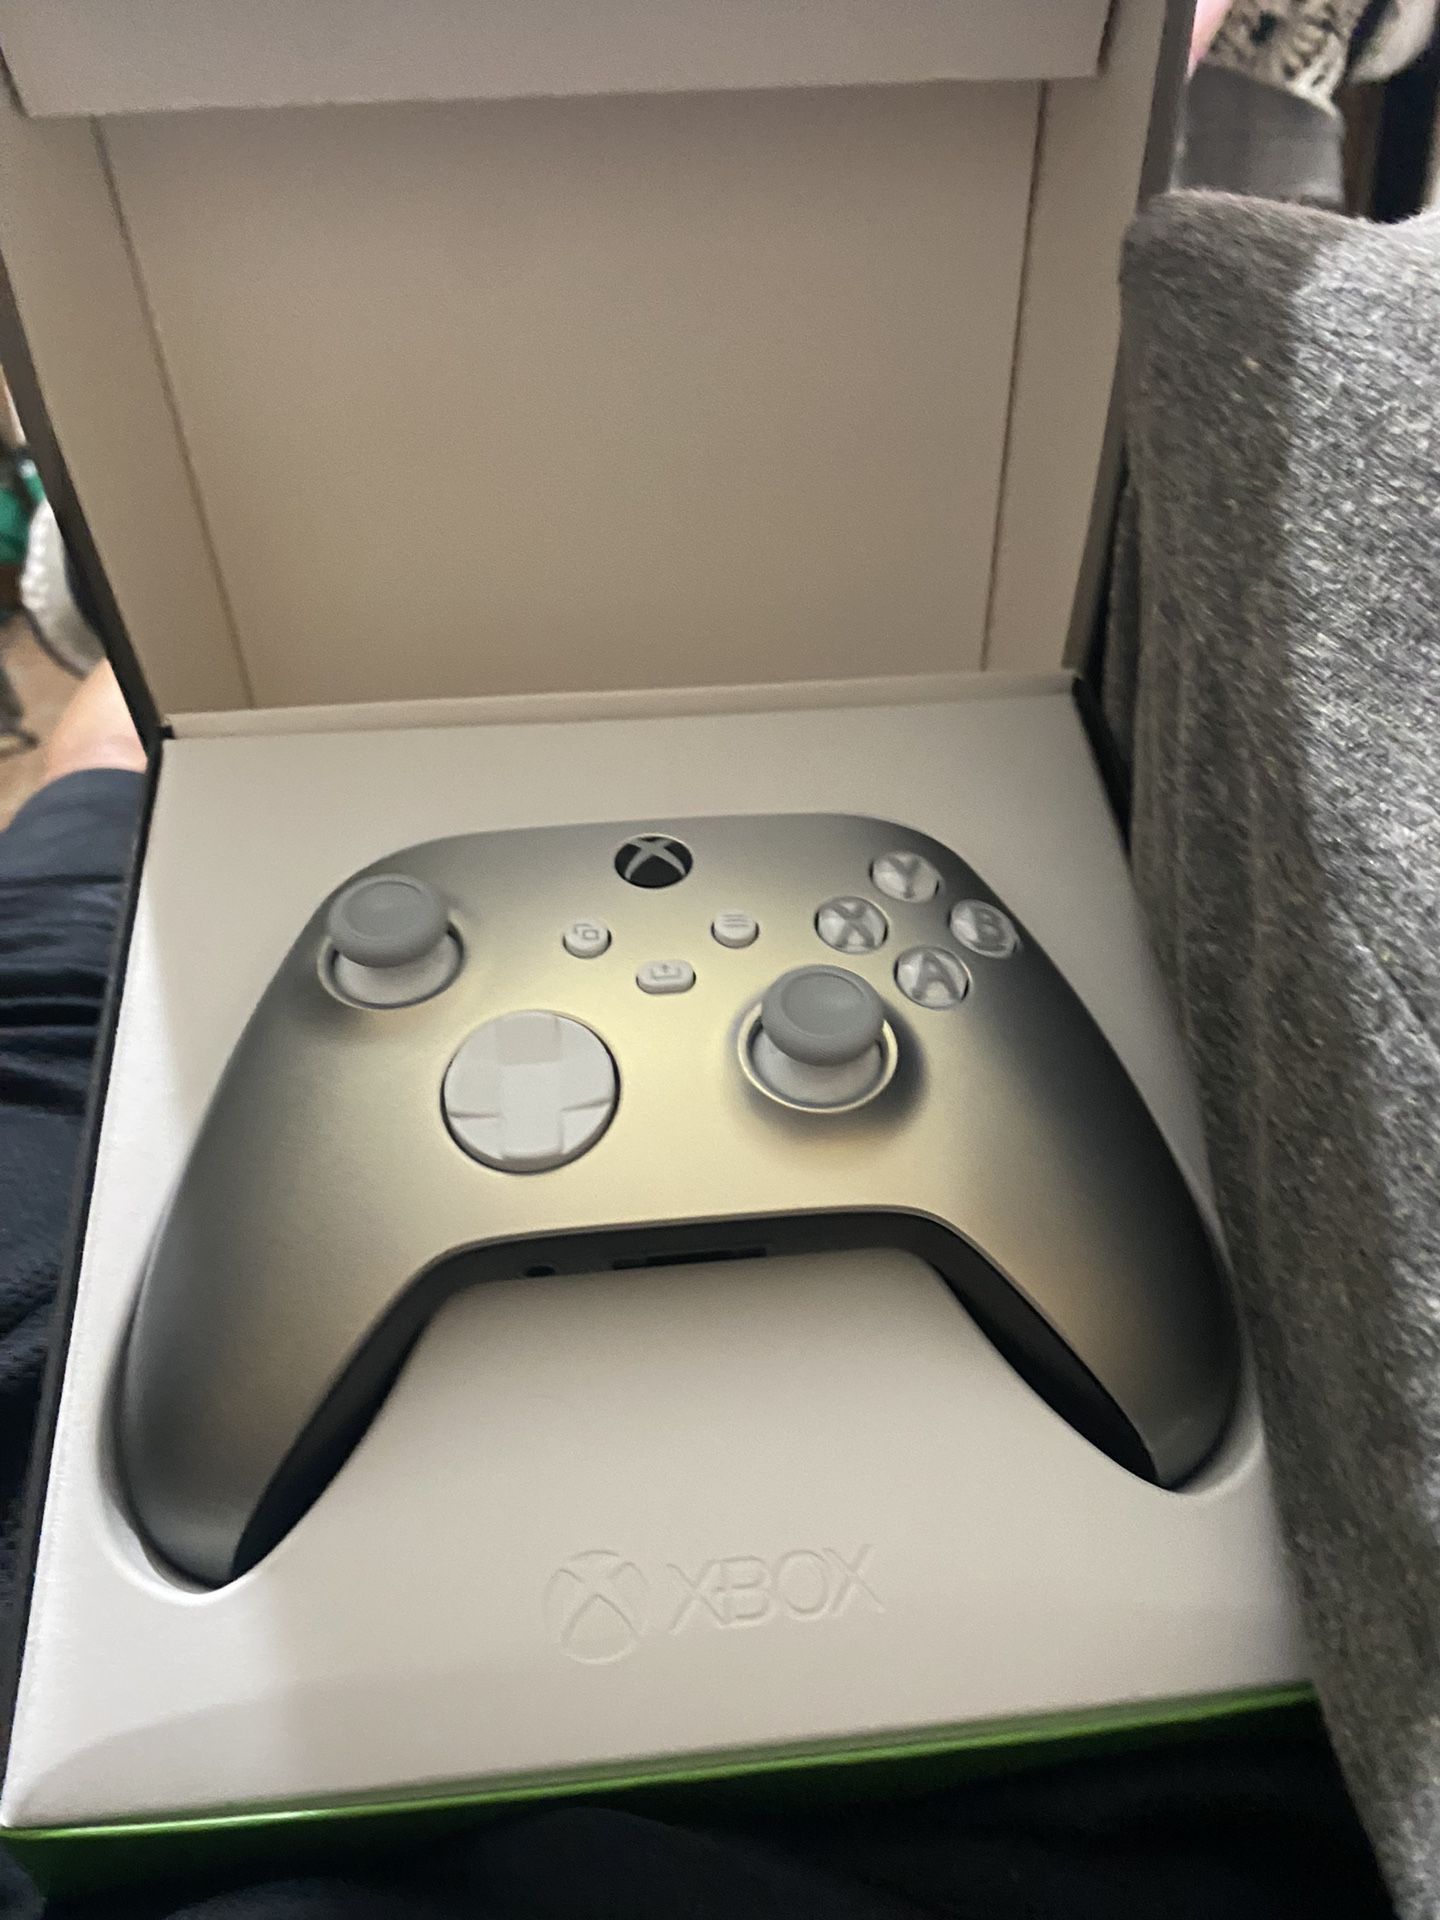 Xbox Lunar Shift Controller for Sale in Whittier, CA - OfferUp